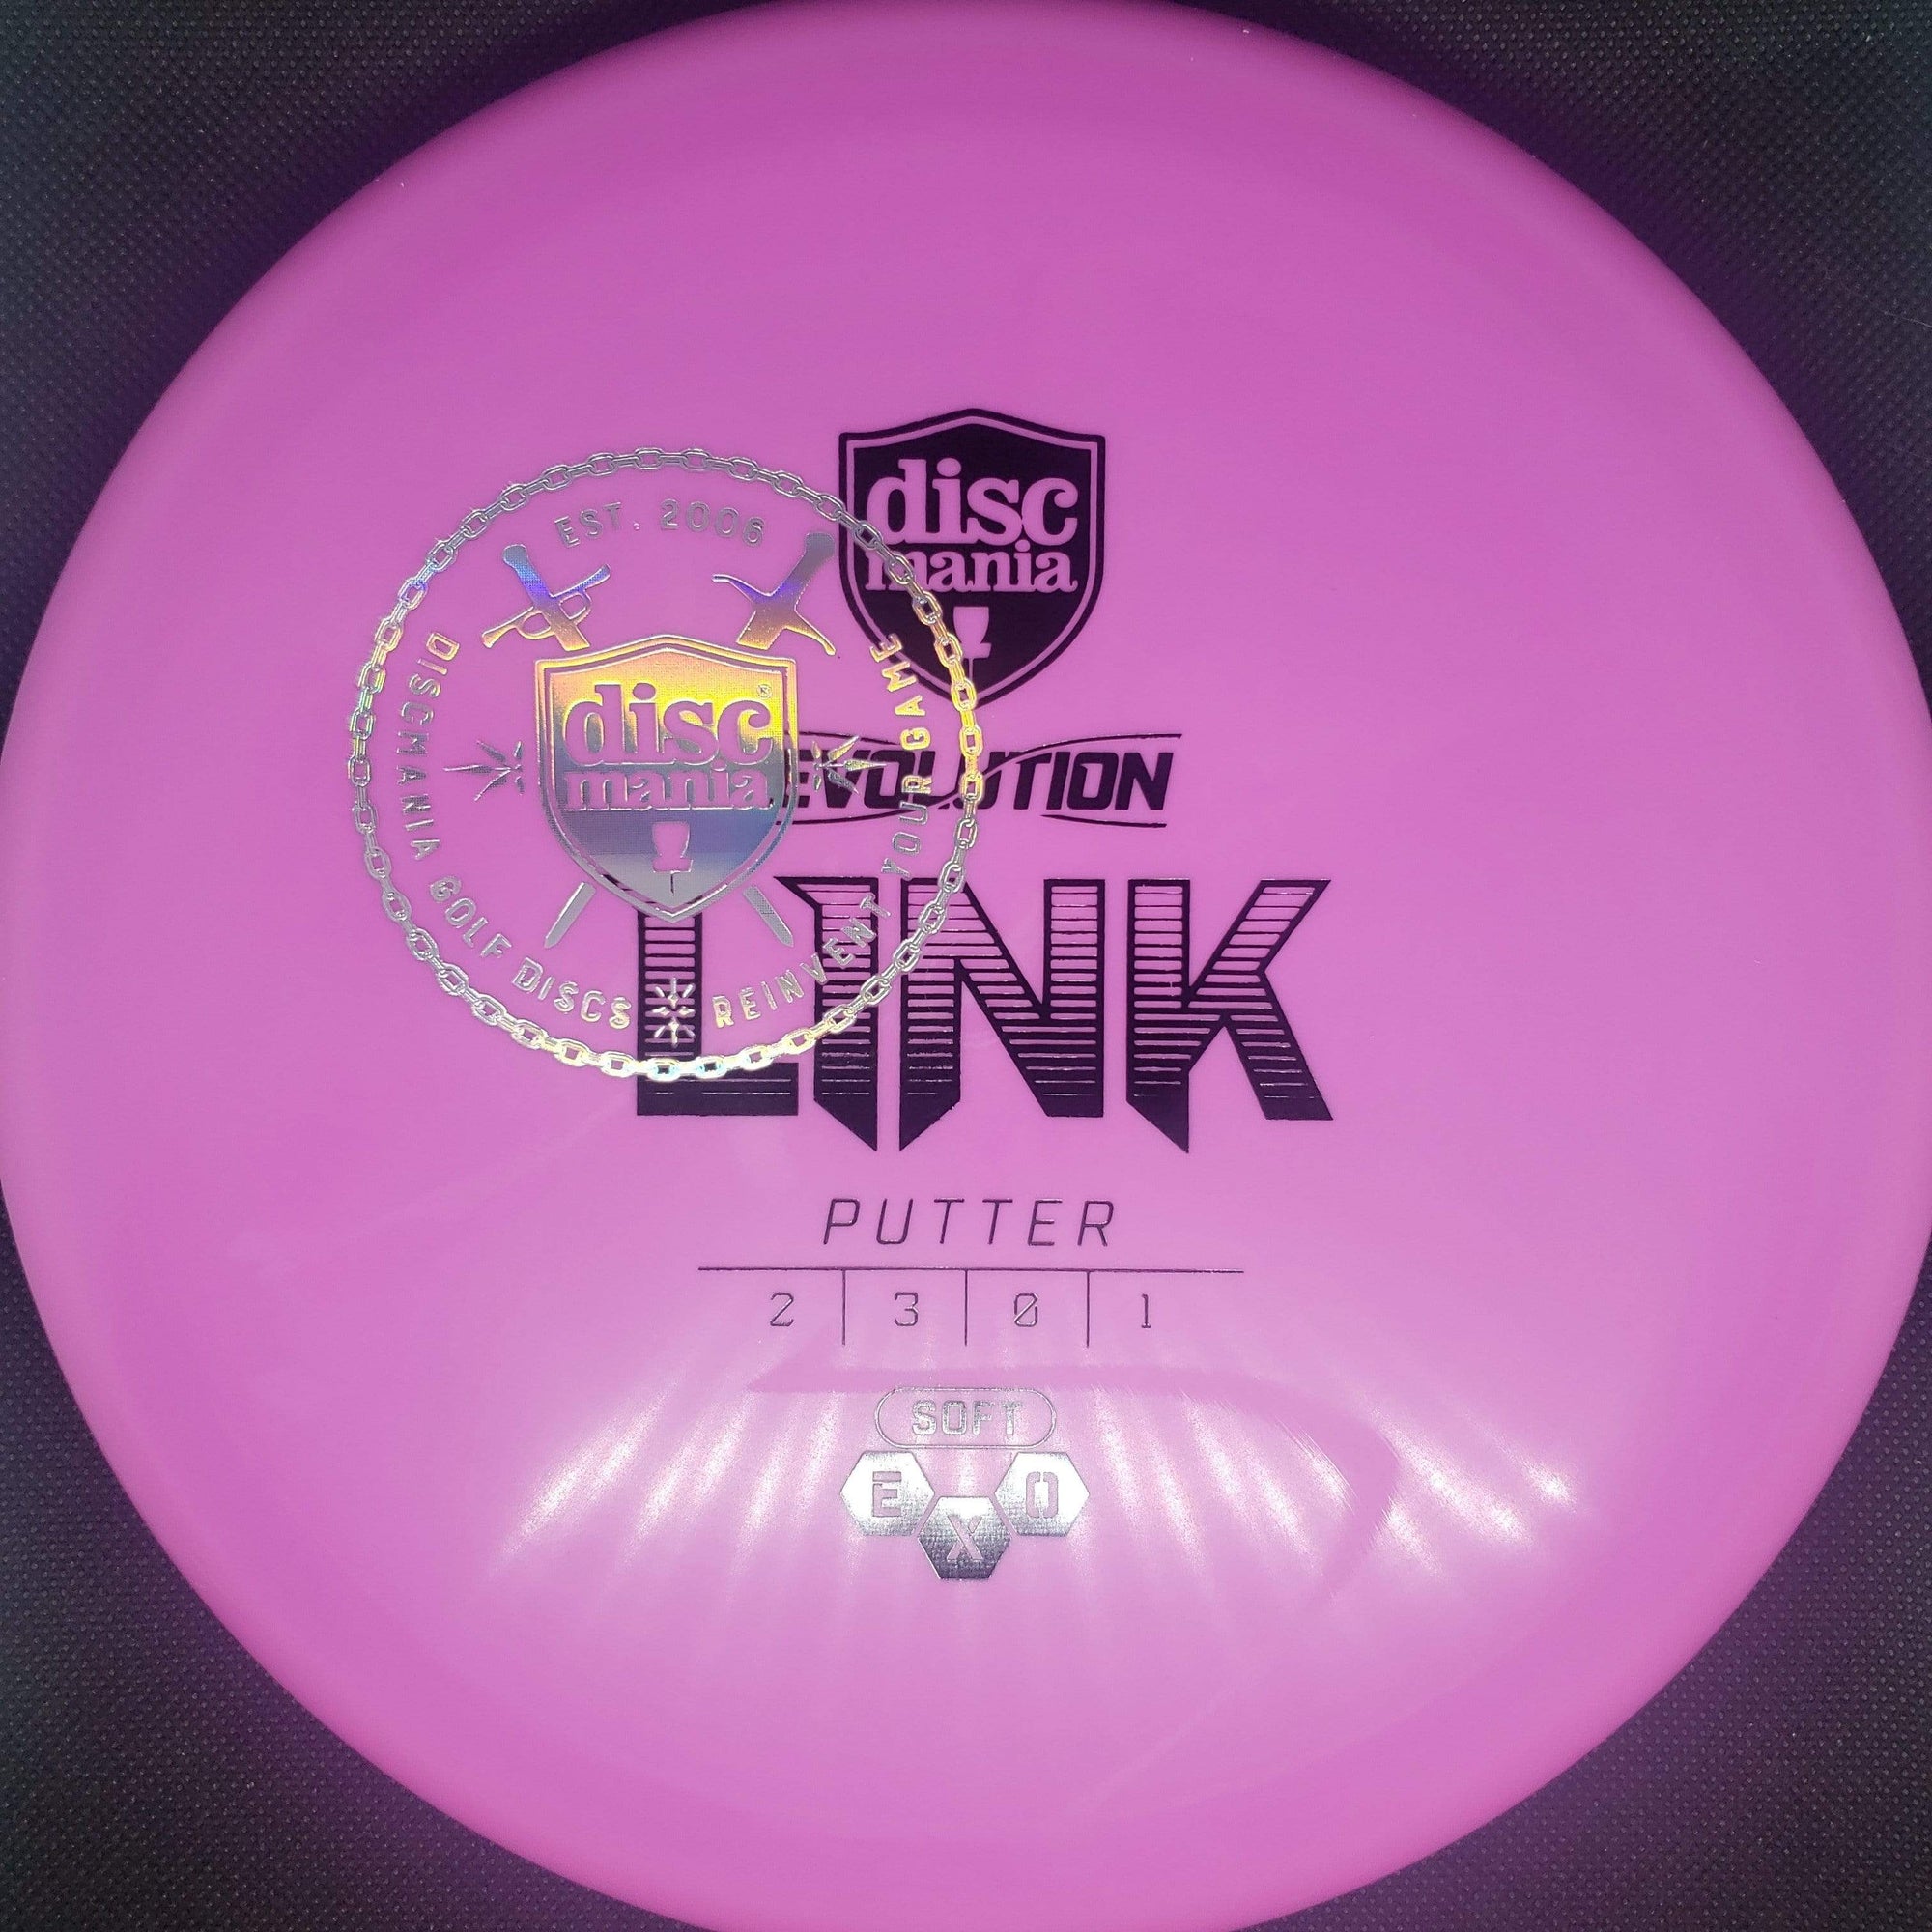 Discmania Putter Pink Black and Silver Shield Stamp 173g Soft Exo Link 2/3/0/1